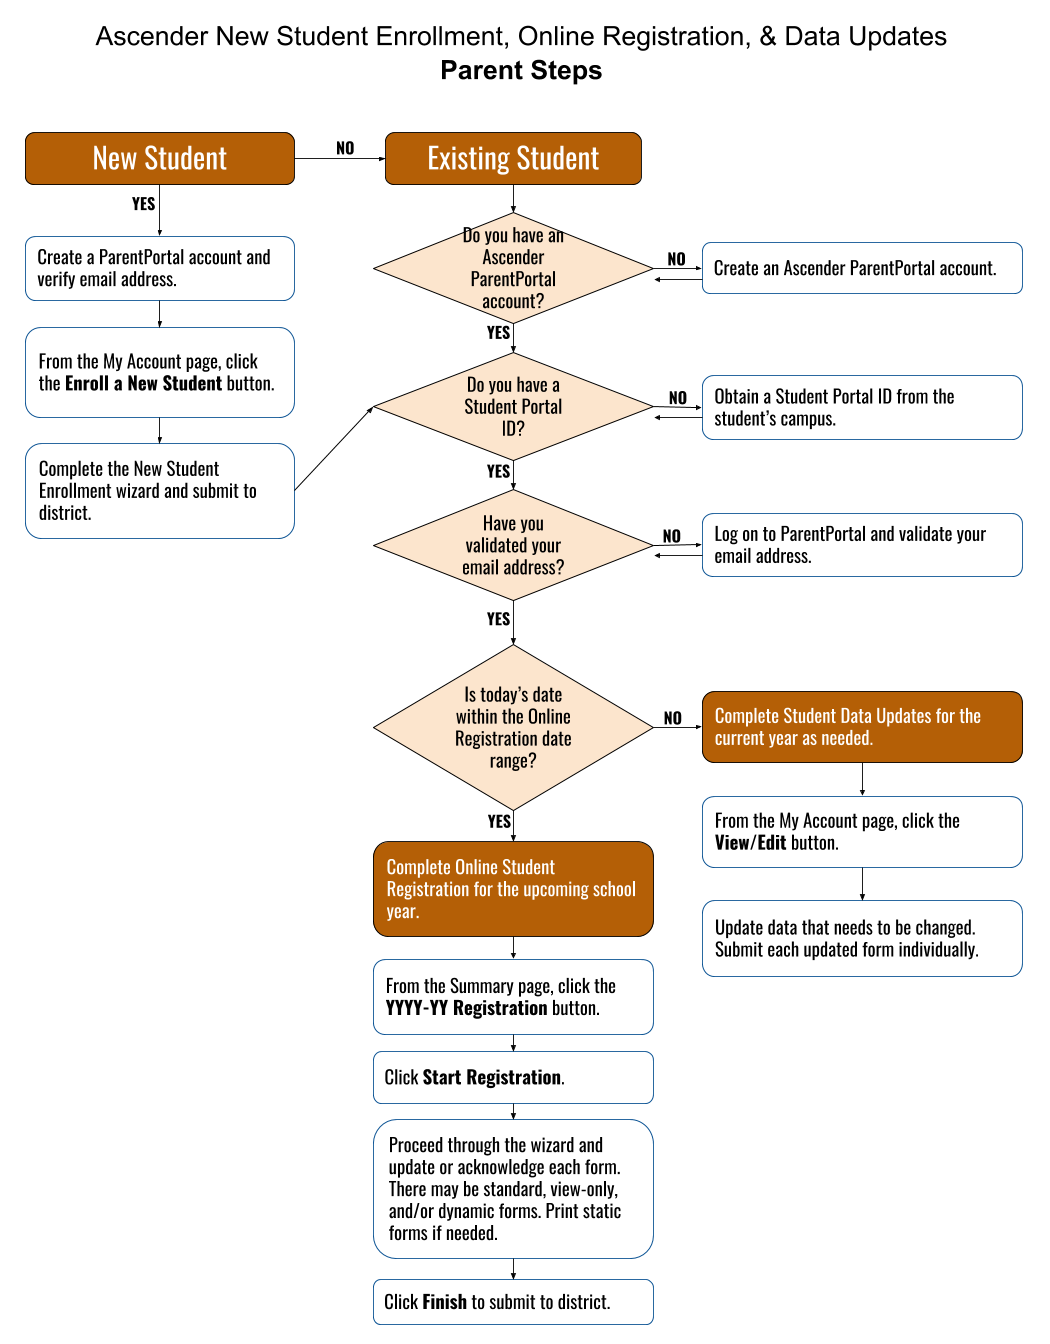 flow chart showing Parent steps for student enrollment and data updates